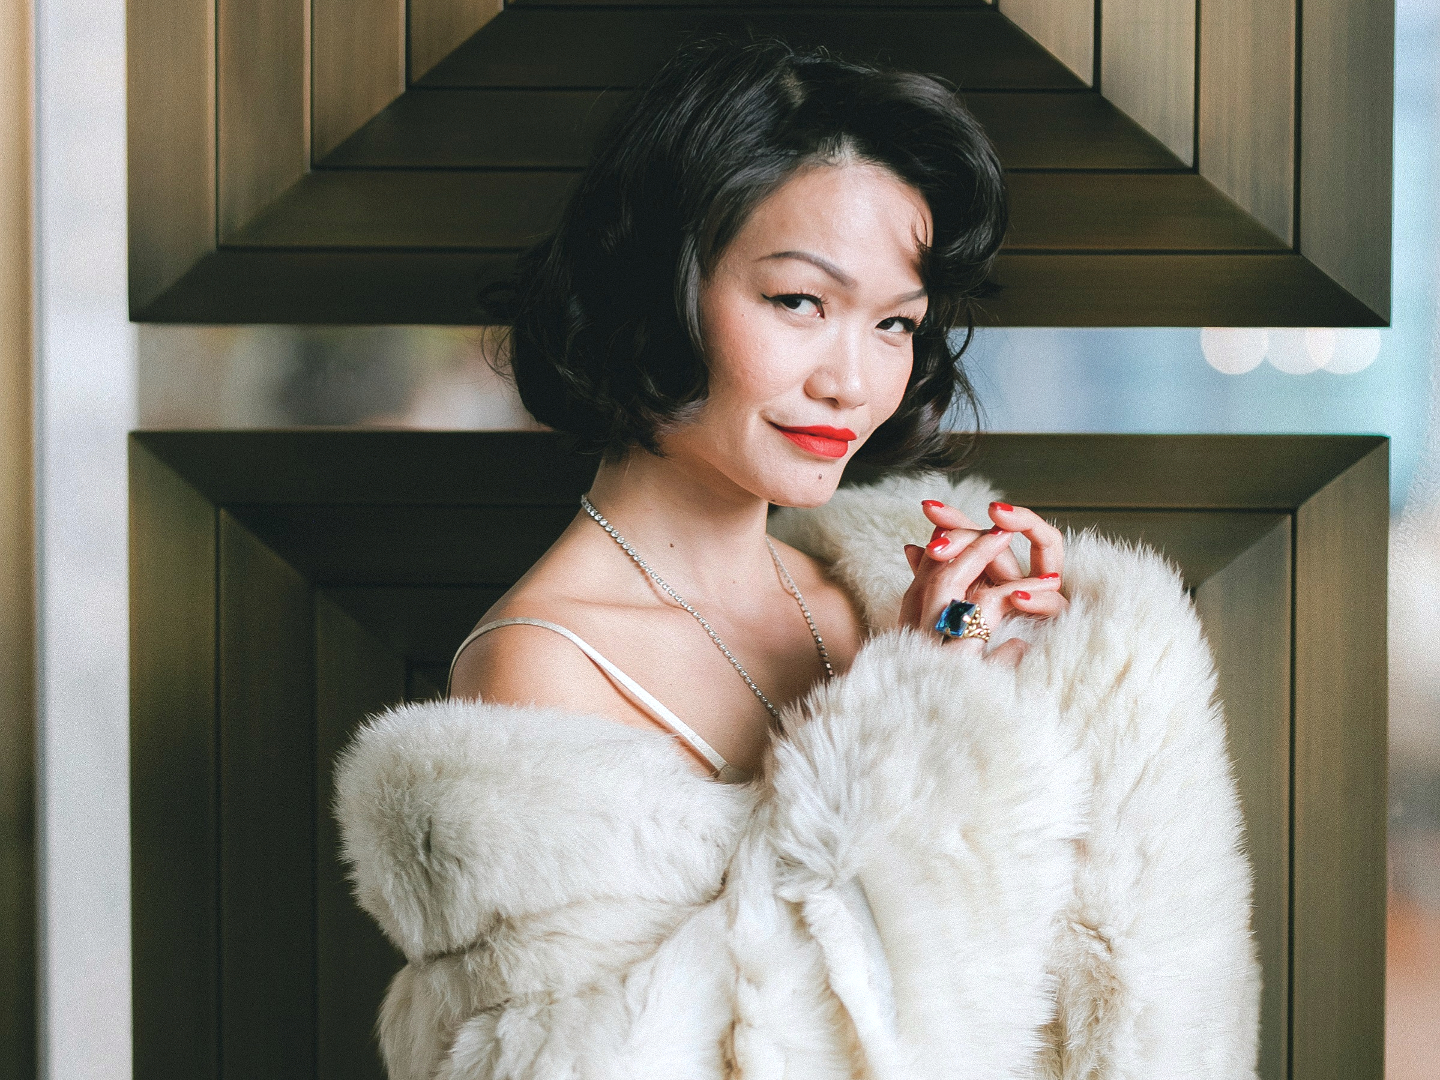 Jazz vocalist Janet Lee on the long-awaited return of live music in KL |  Options, The Edge